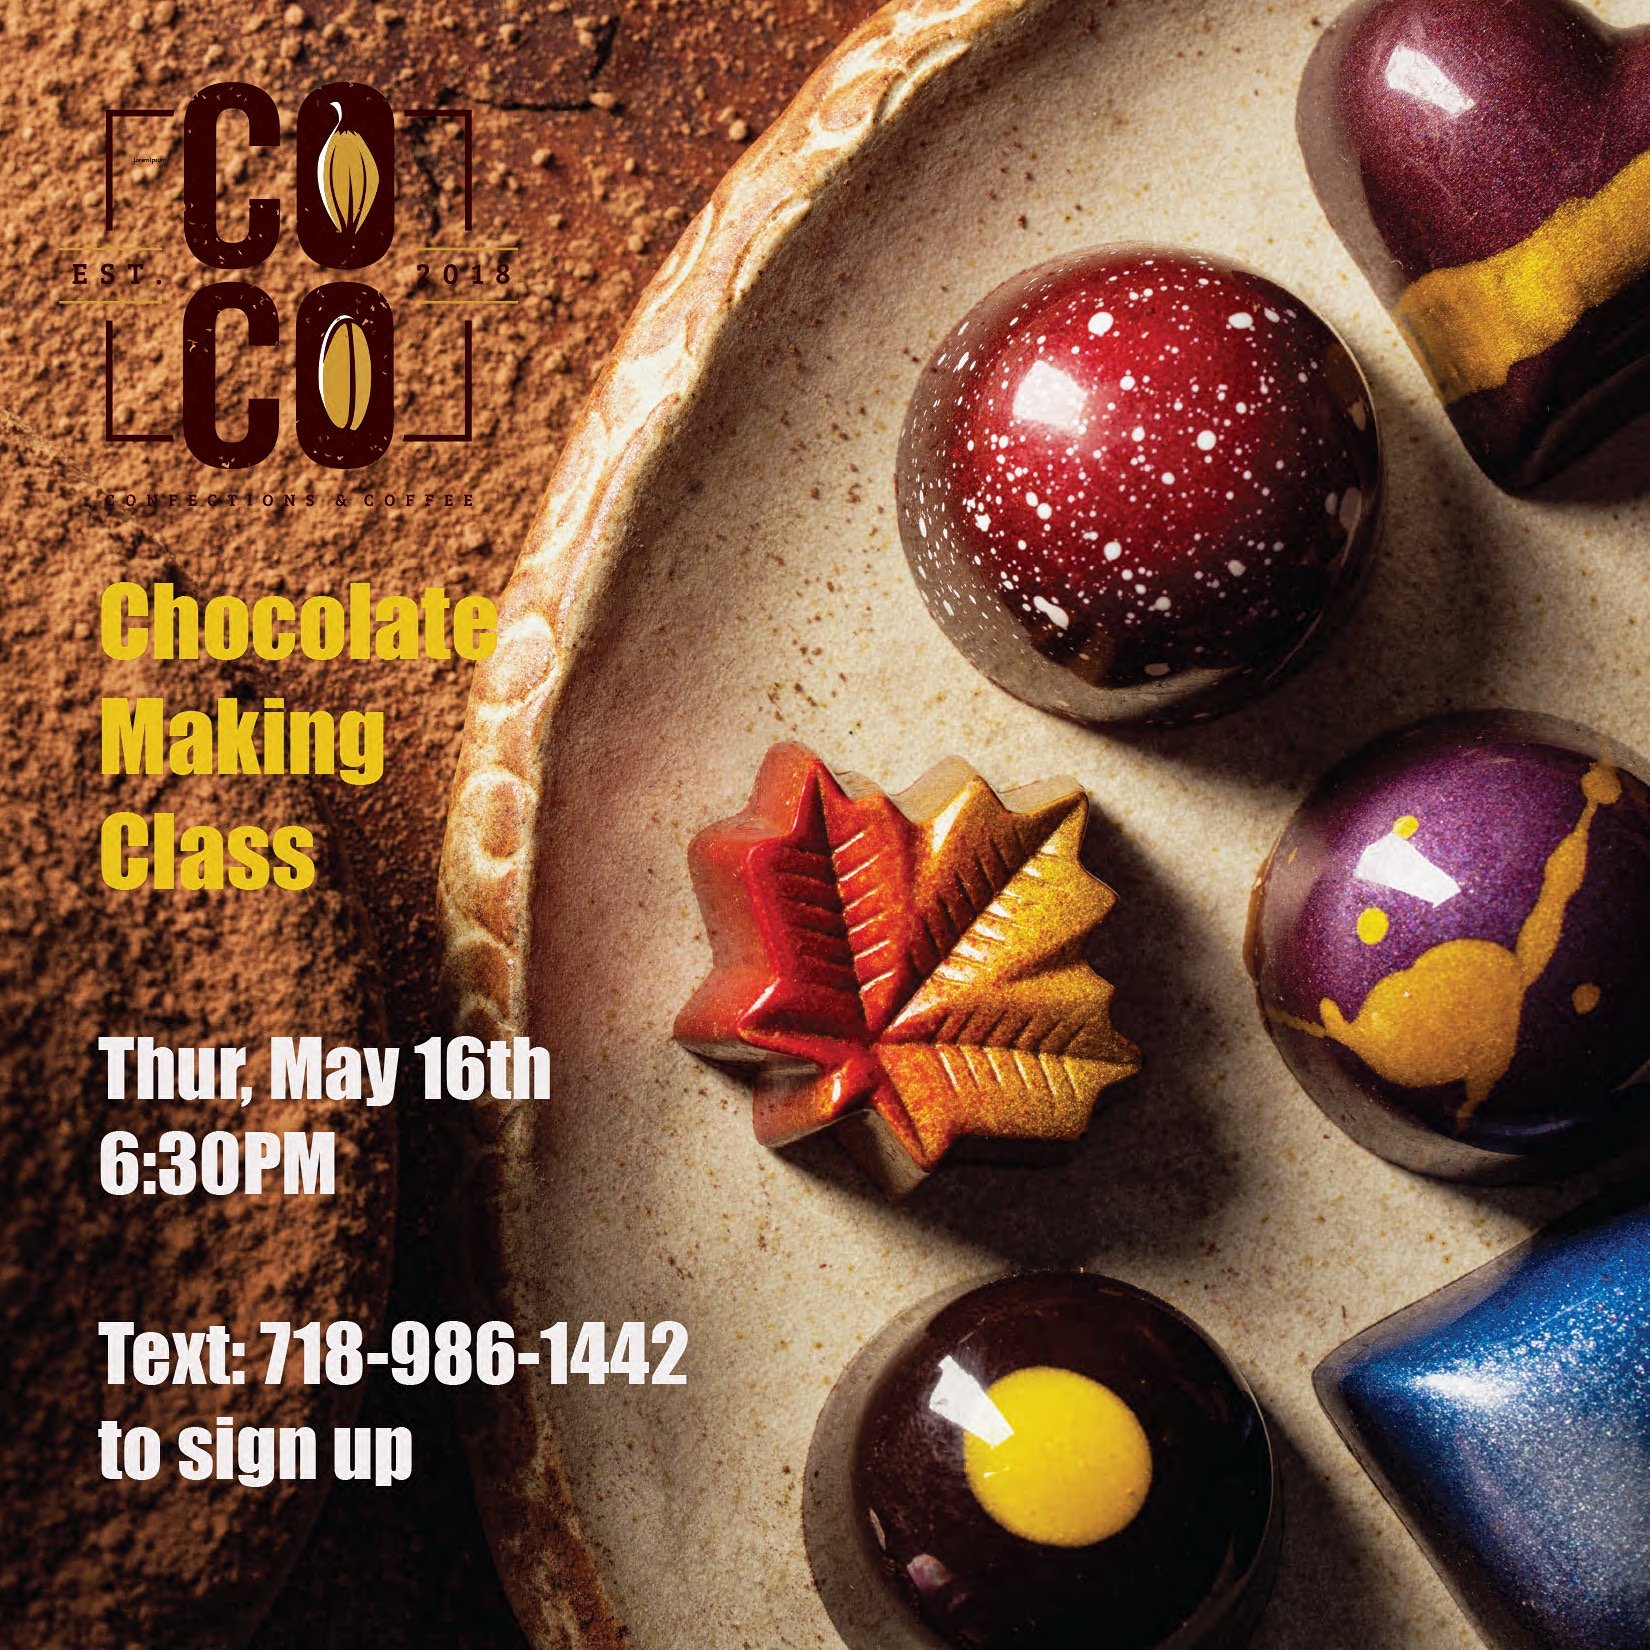 We have the PERFECT gift for M❤M!
A chocolate making class together... A Win-win for her, a great event learning to make delicious chocolate and your time! 

Thursday, May 16th, 6:30pm
COCO Confections &amp; Coffee
365 Glen Cove Avenue  Sea Cliff, NY